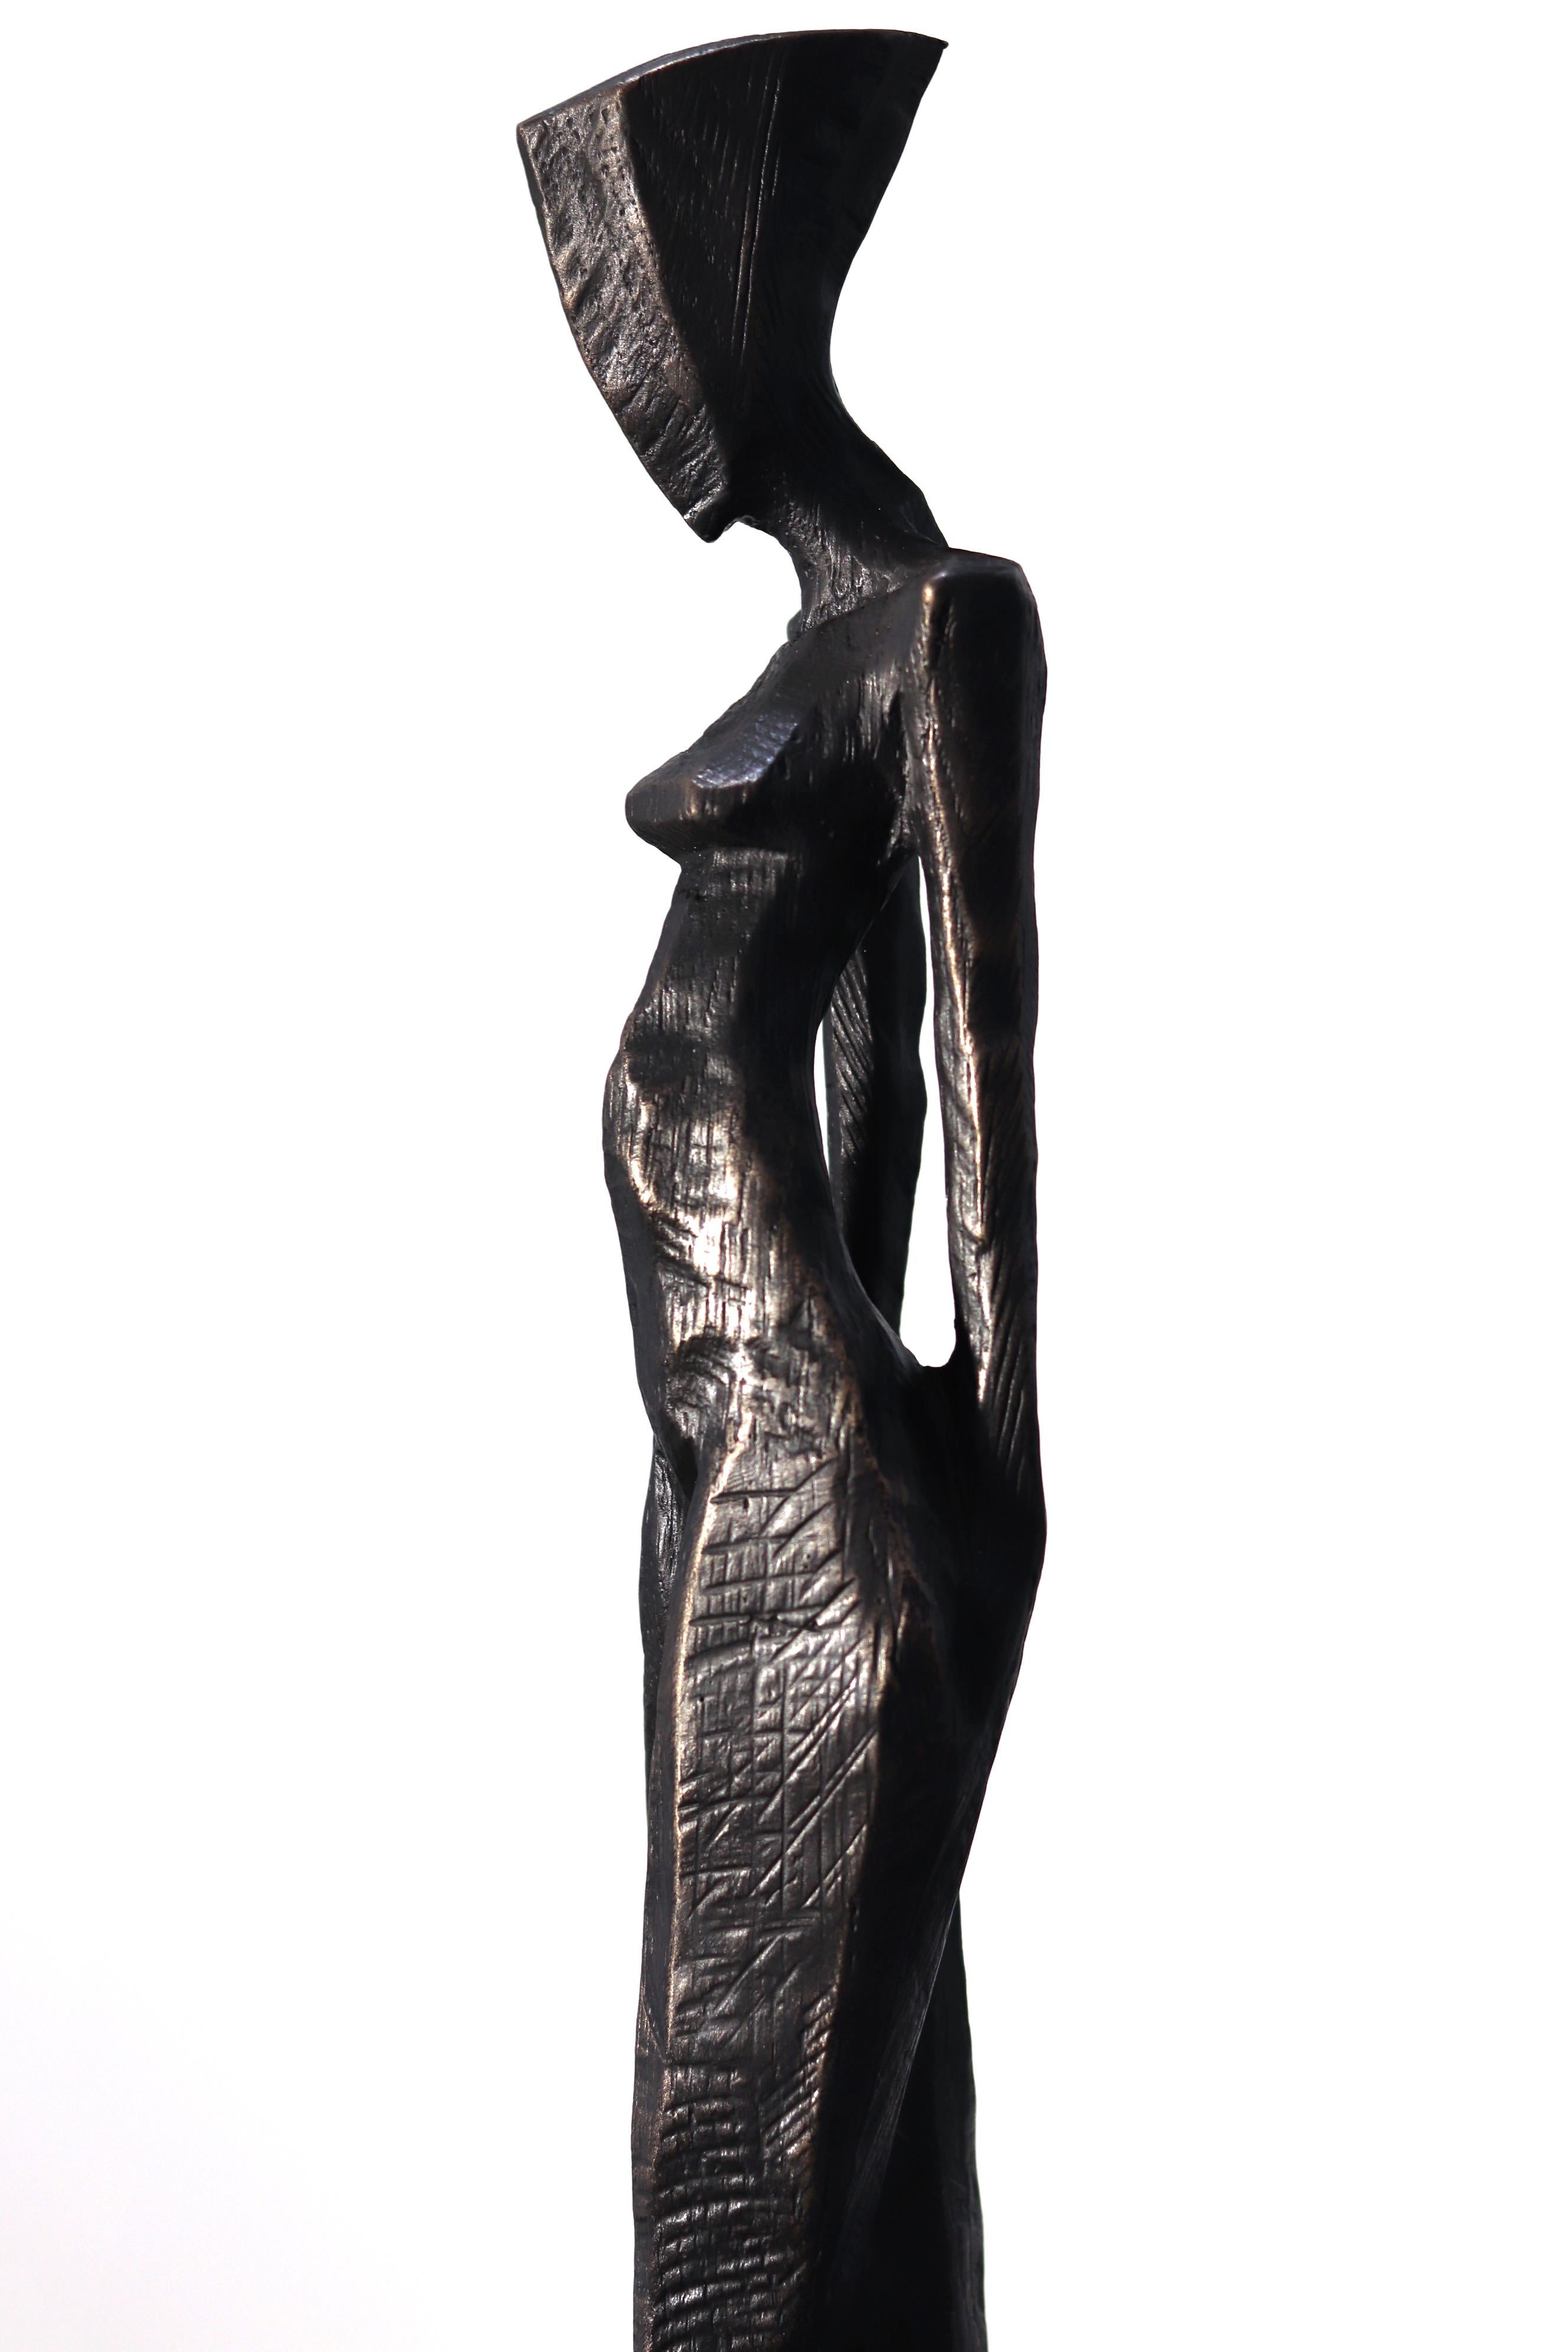 Nathalie - Large Tall Figurative Modern Abstract Cubism Solid Bronze Sculpture For Sale 1